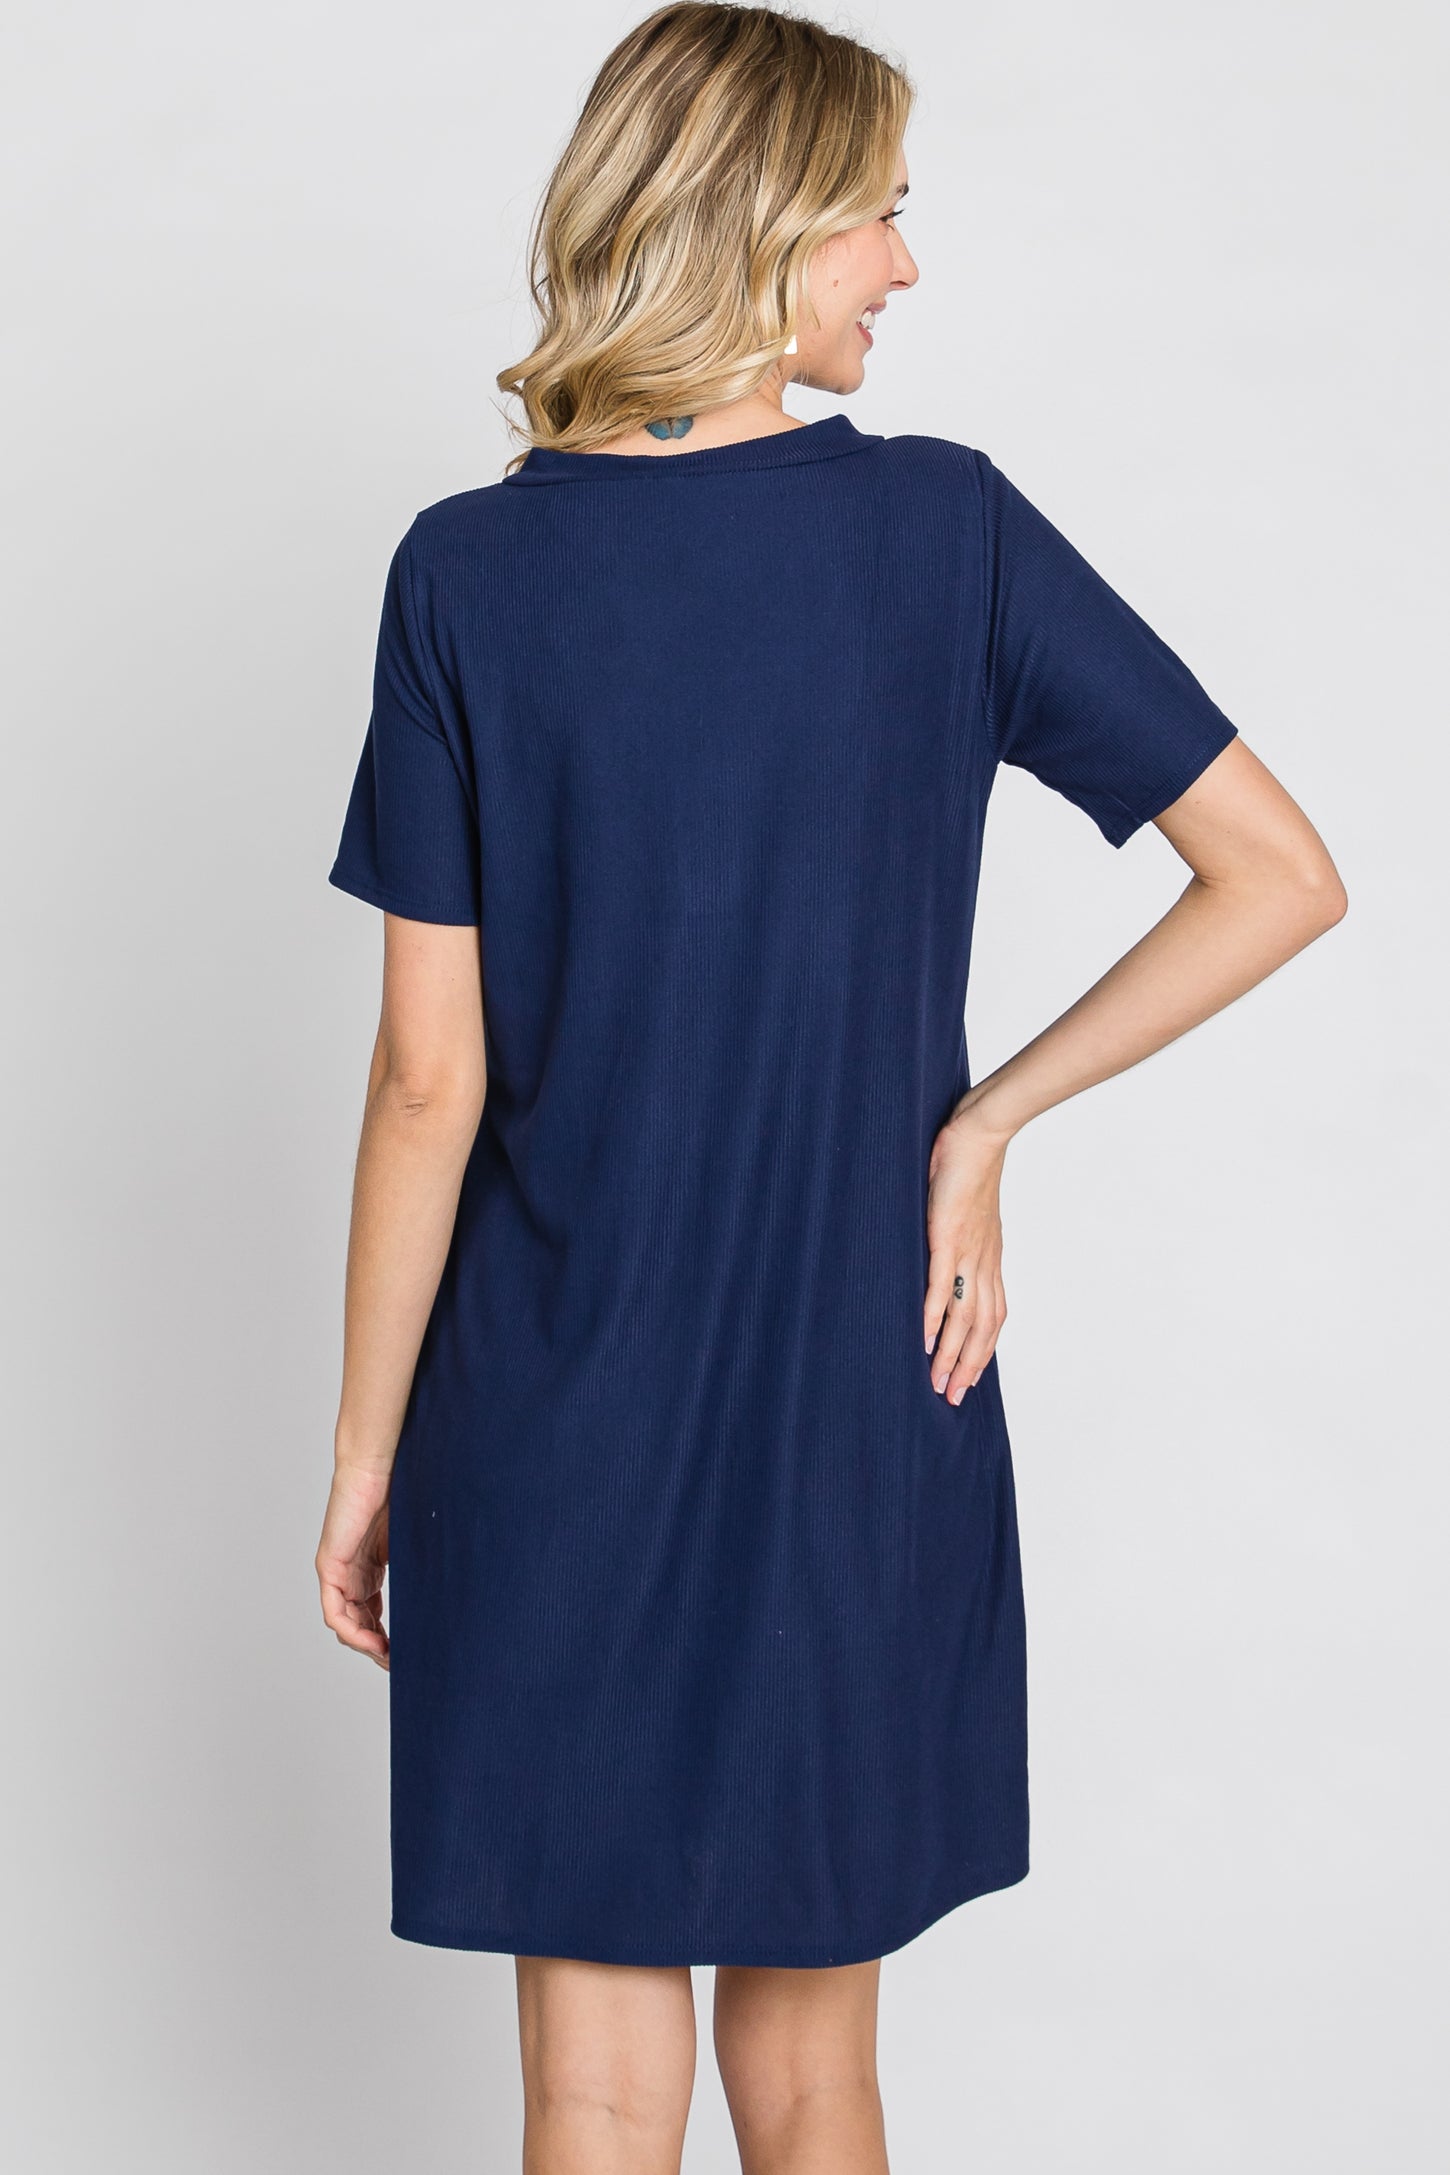 Navy Ribbed Button Accent Dress